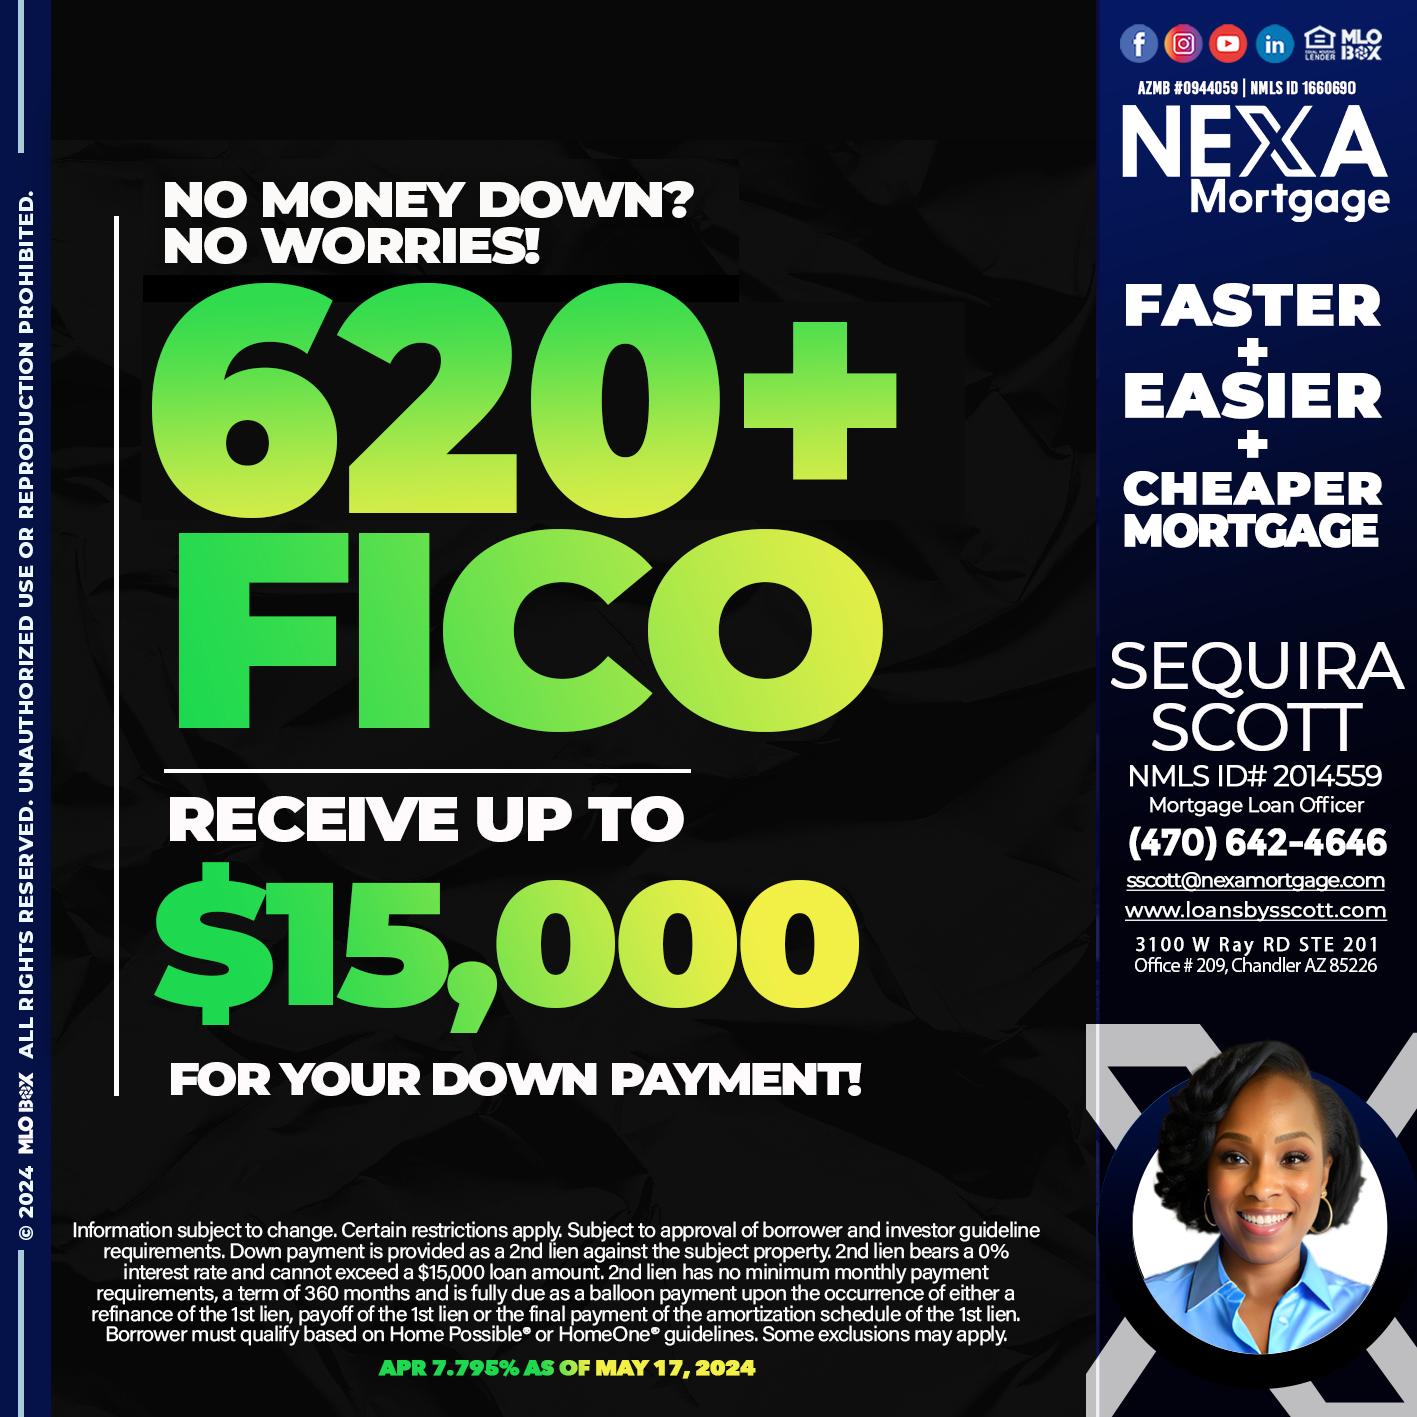 620 FICO - Sequira Scott -Mortgage Loan Officer